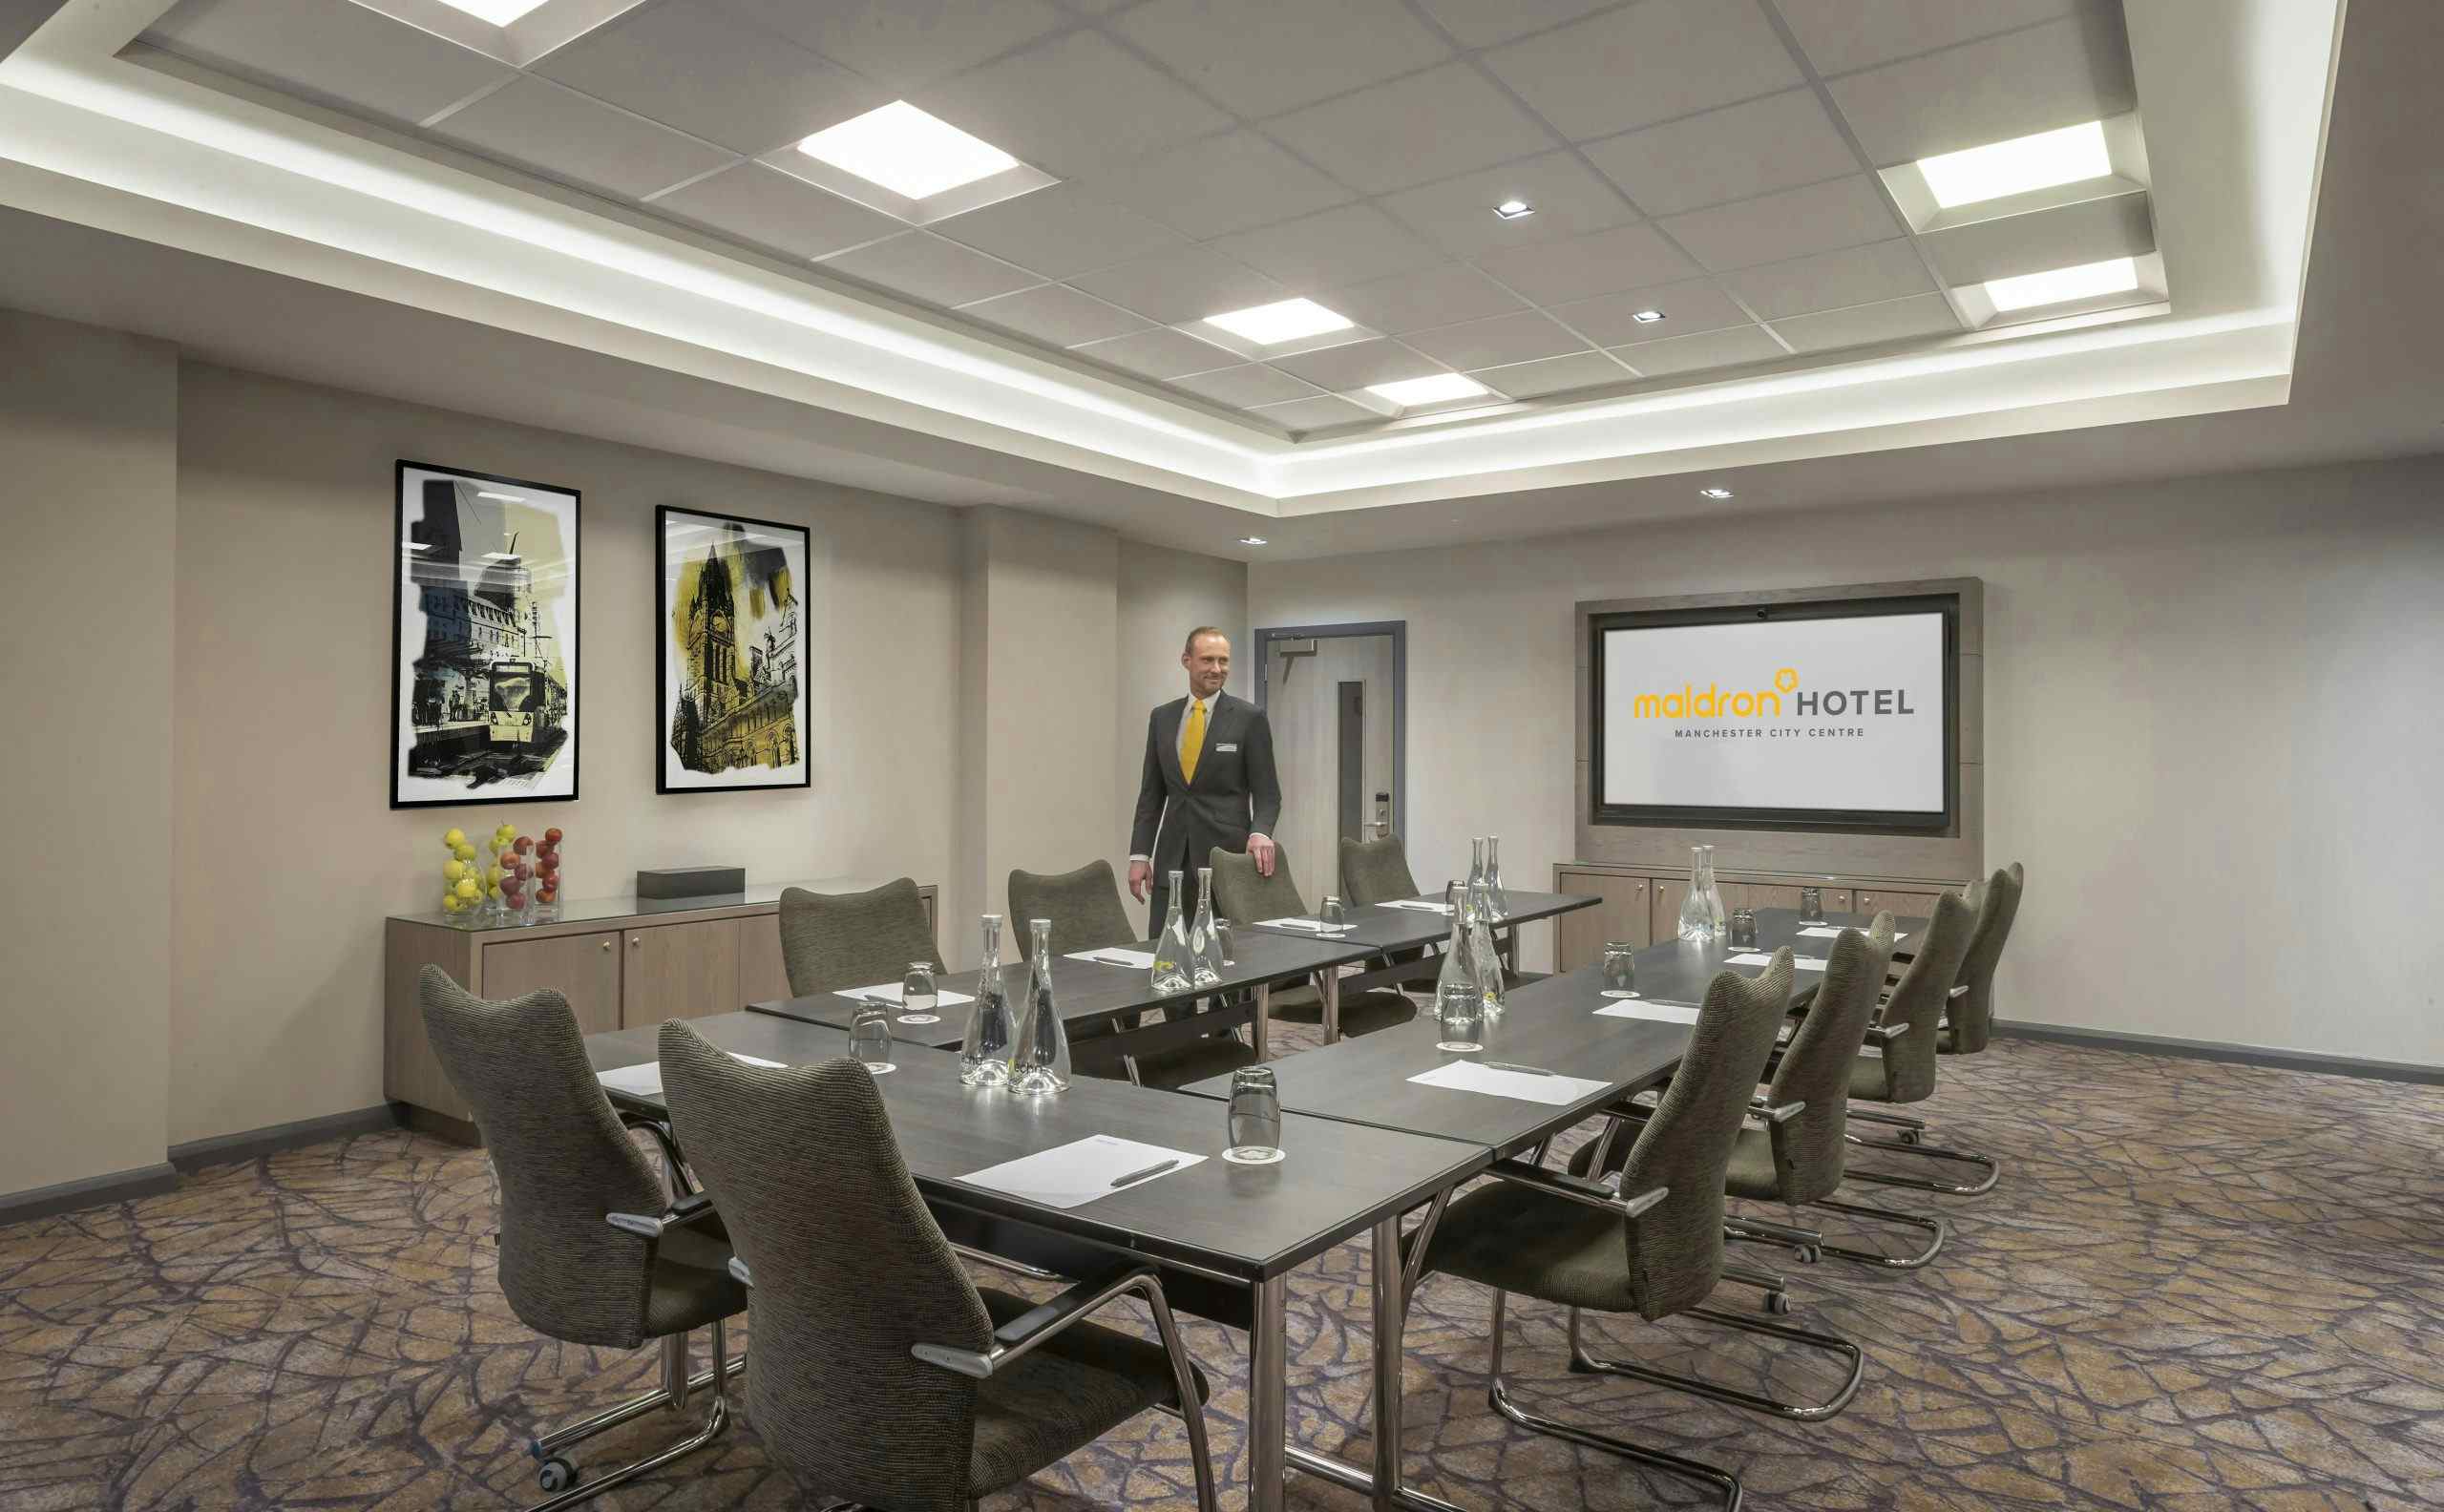 Meeting Room, Maldron Hotel Manchester City Centre